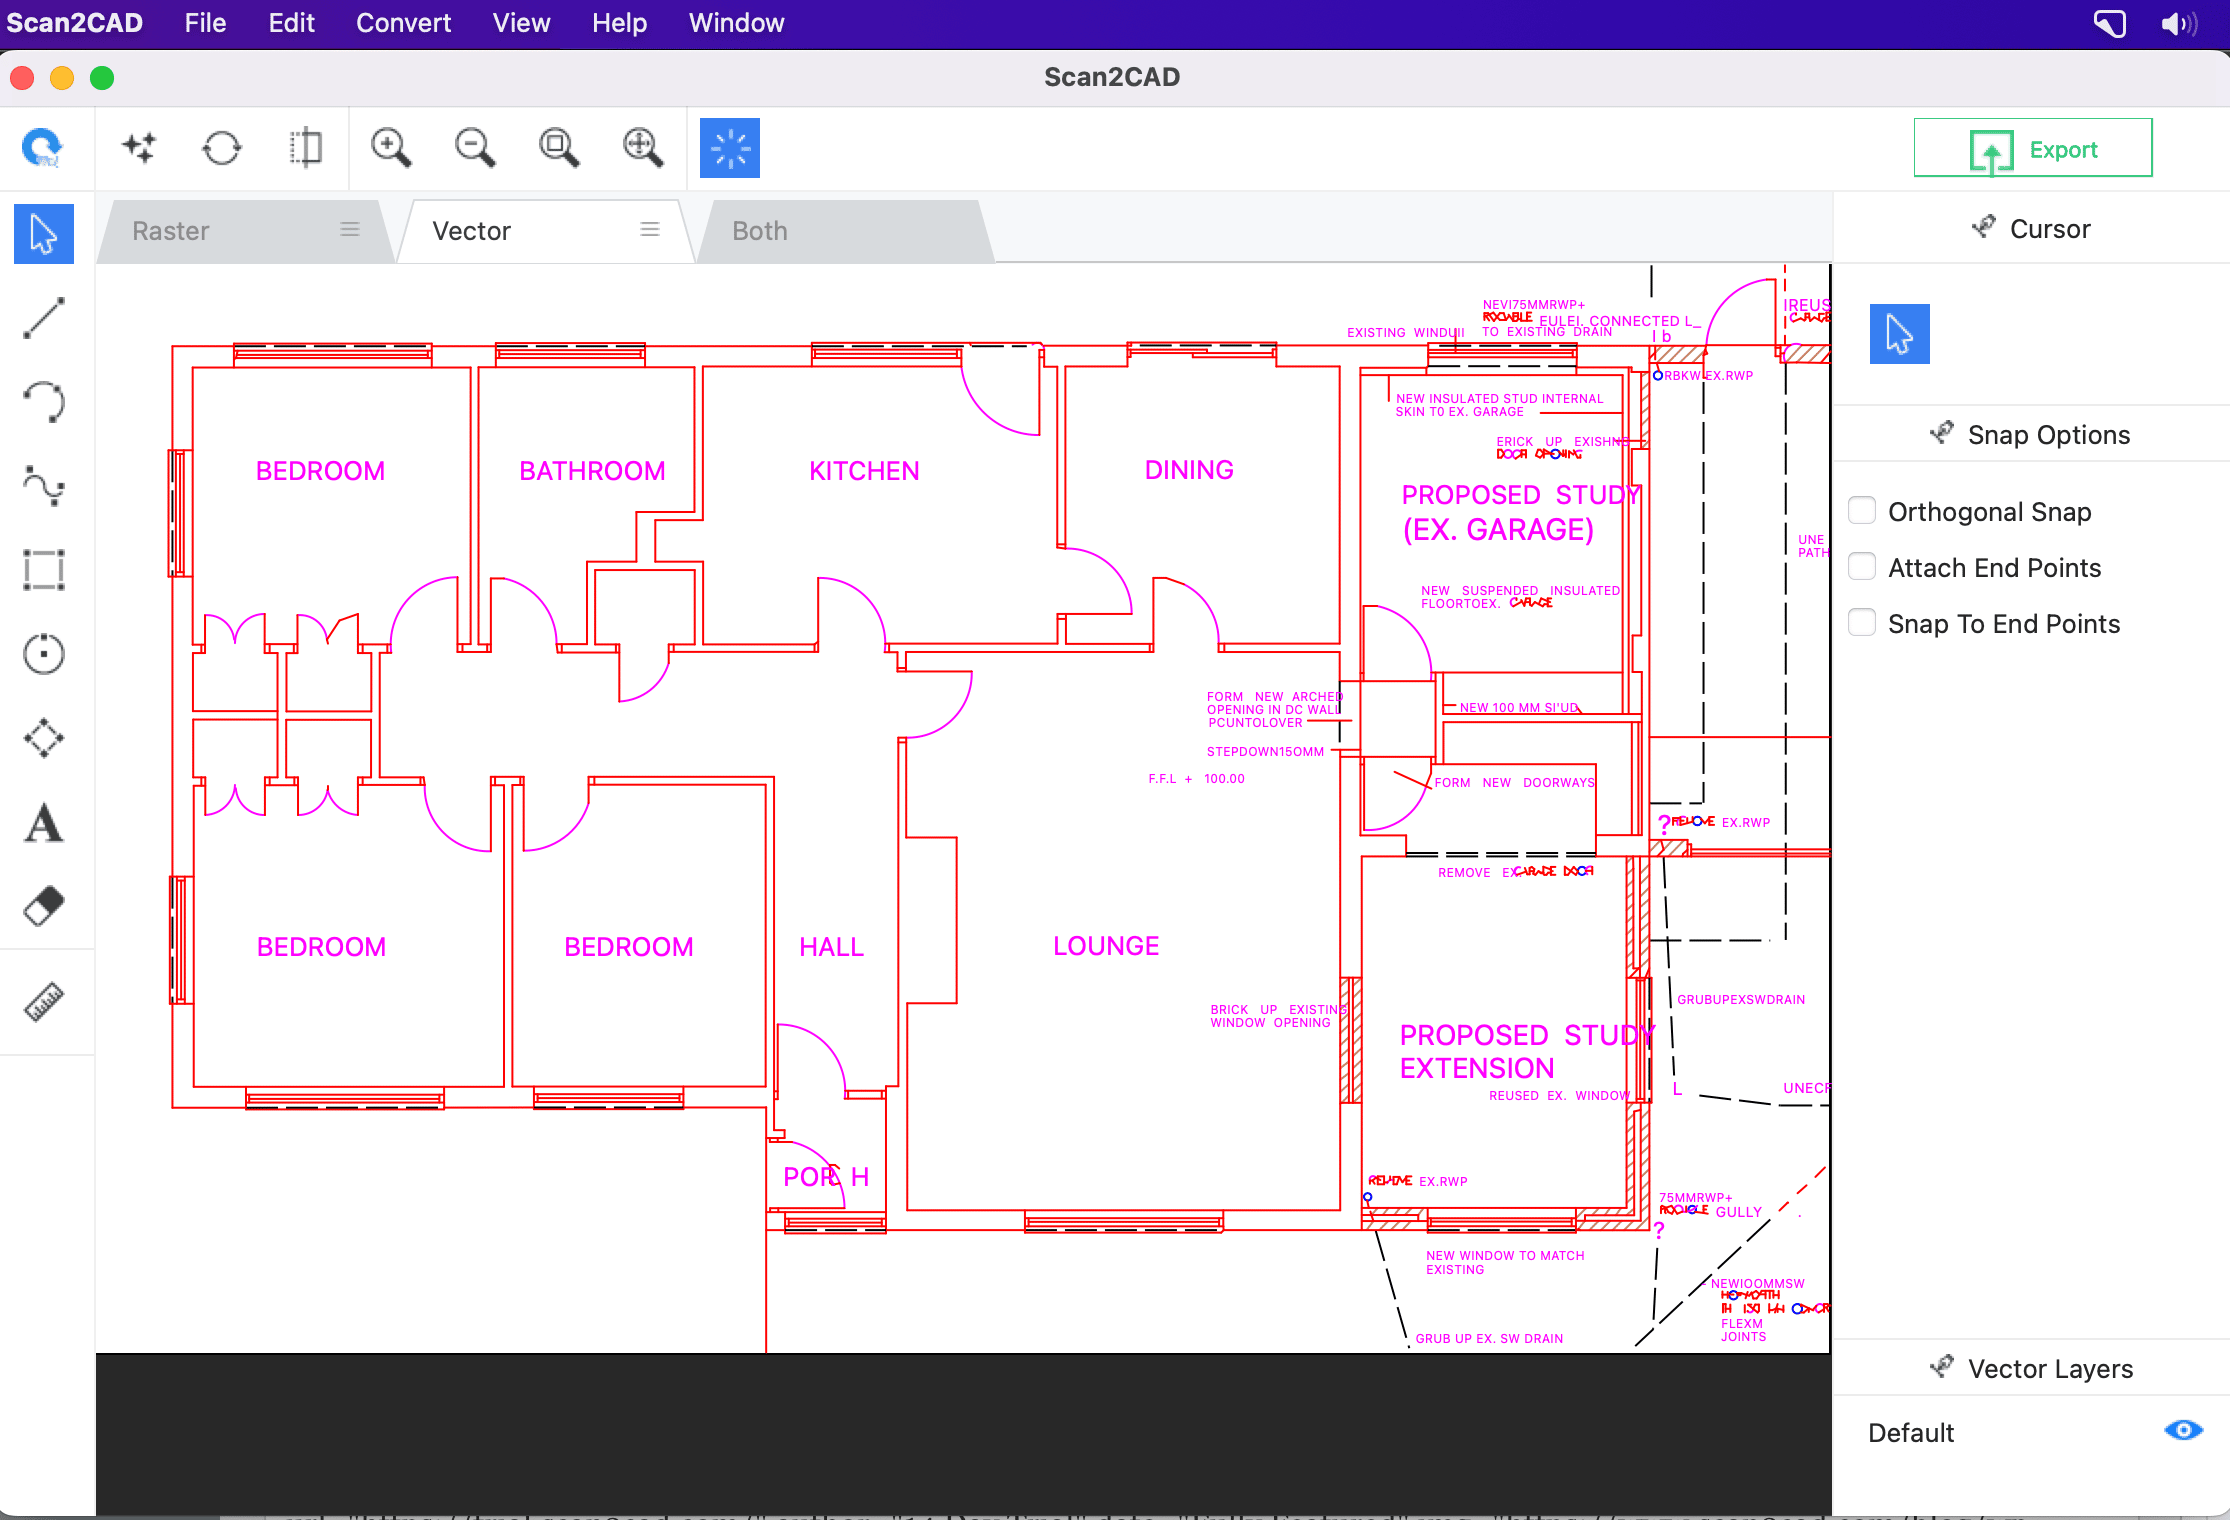 Floorplan converted to DXF in Scan2CAD